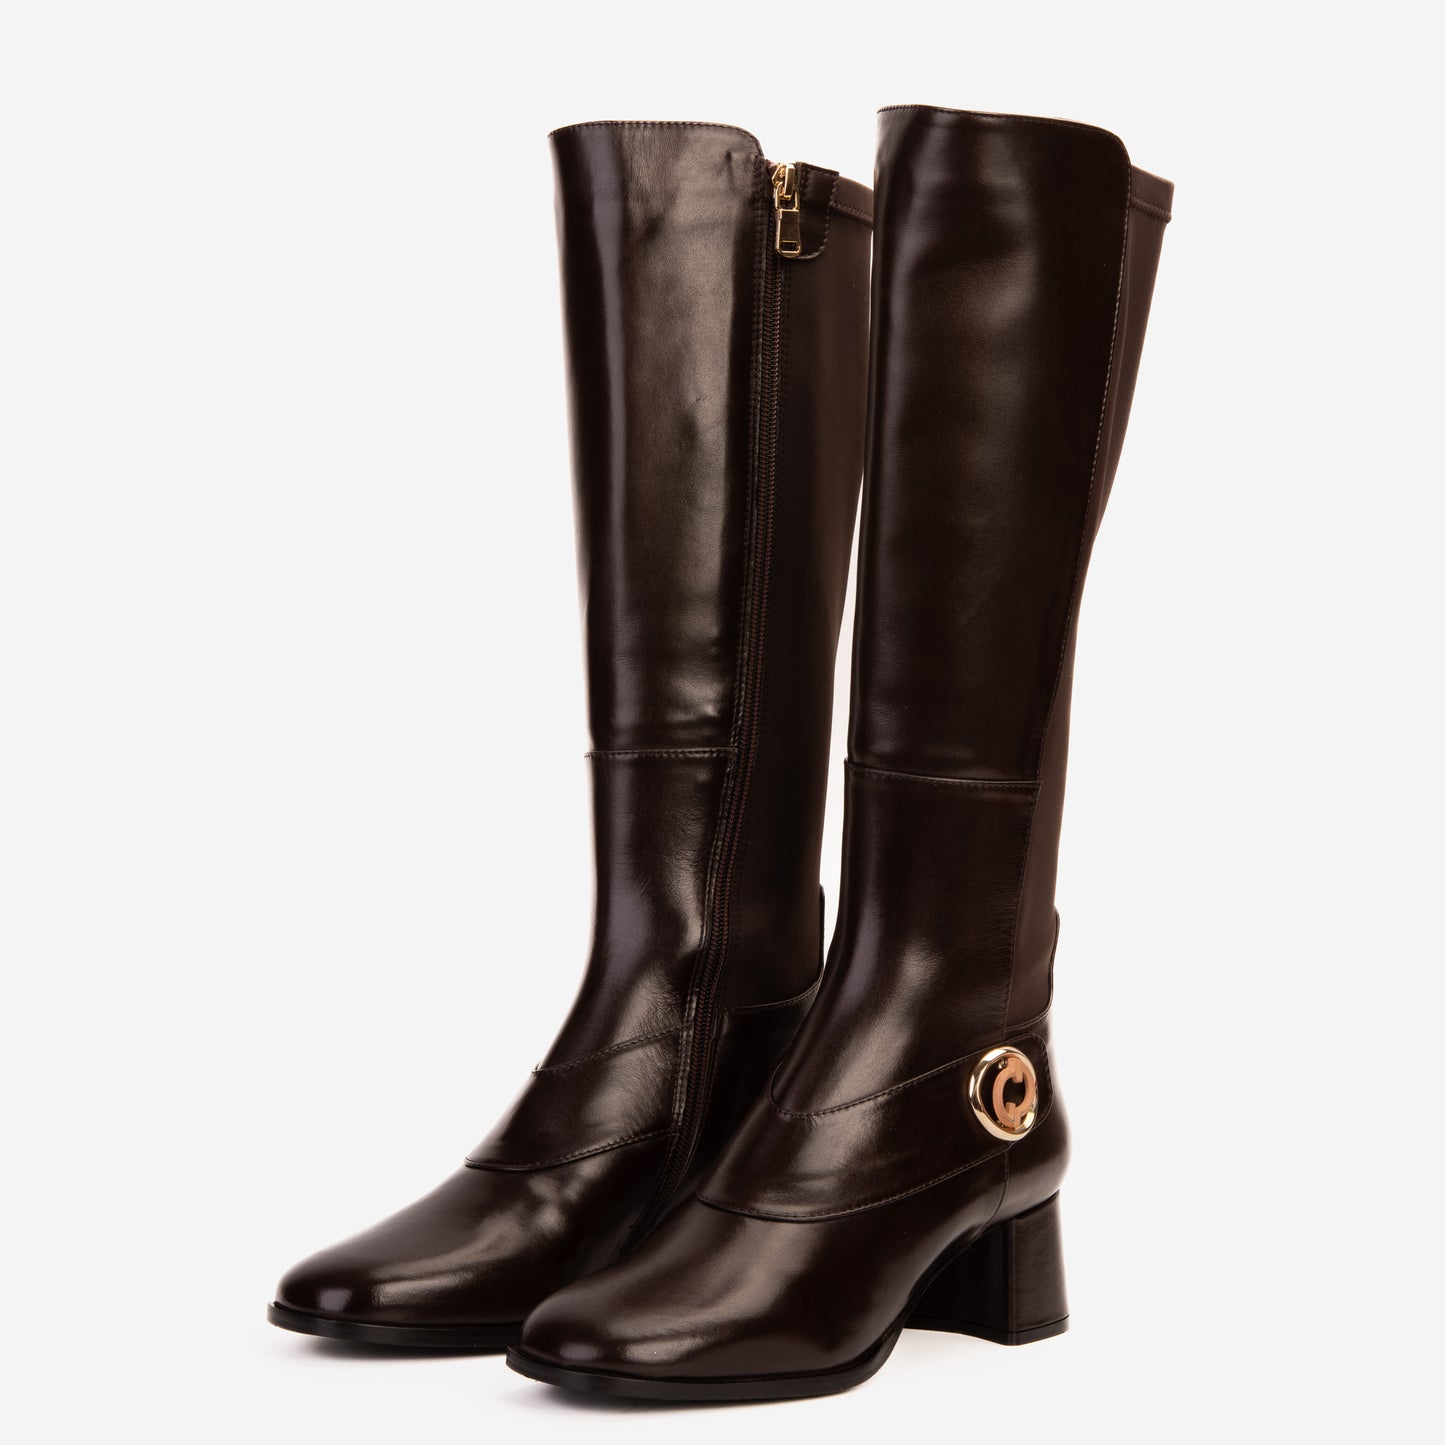 The Windsor Brown Leather Knee High Boot